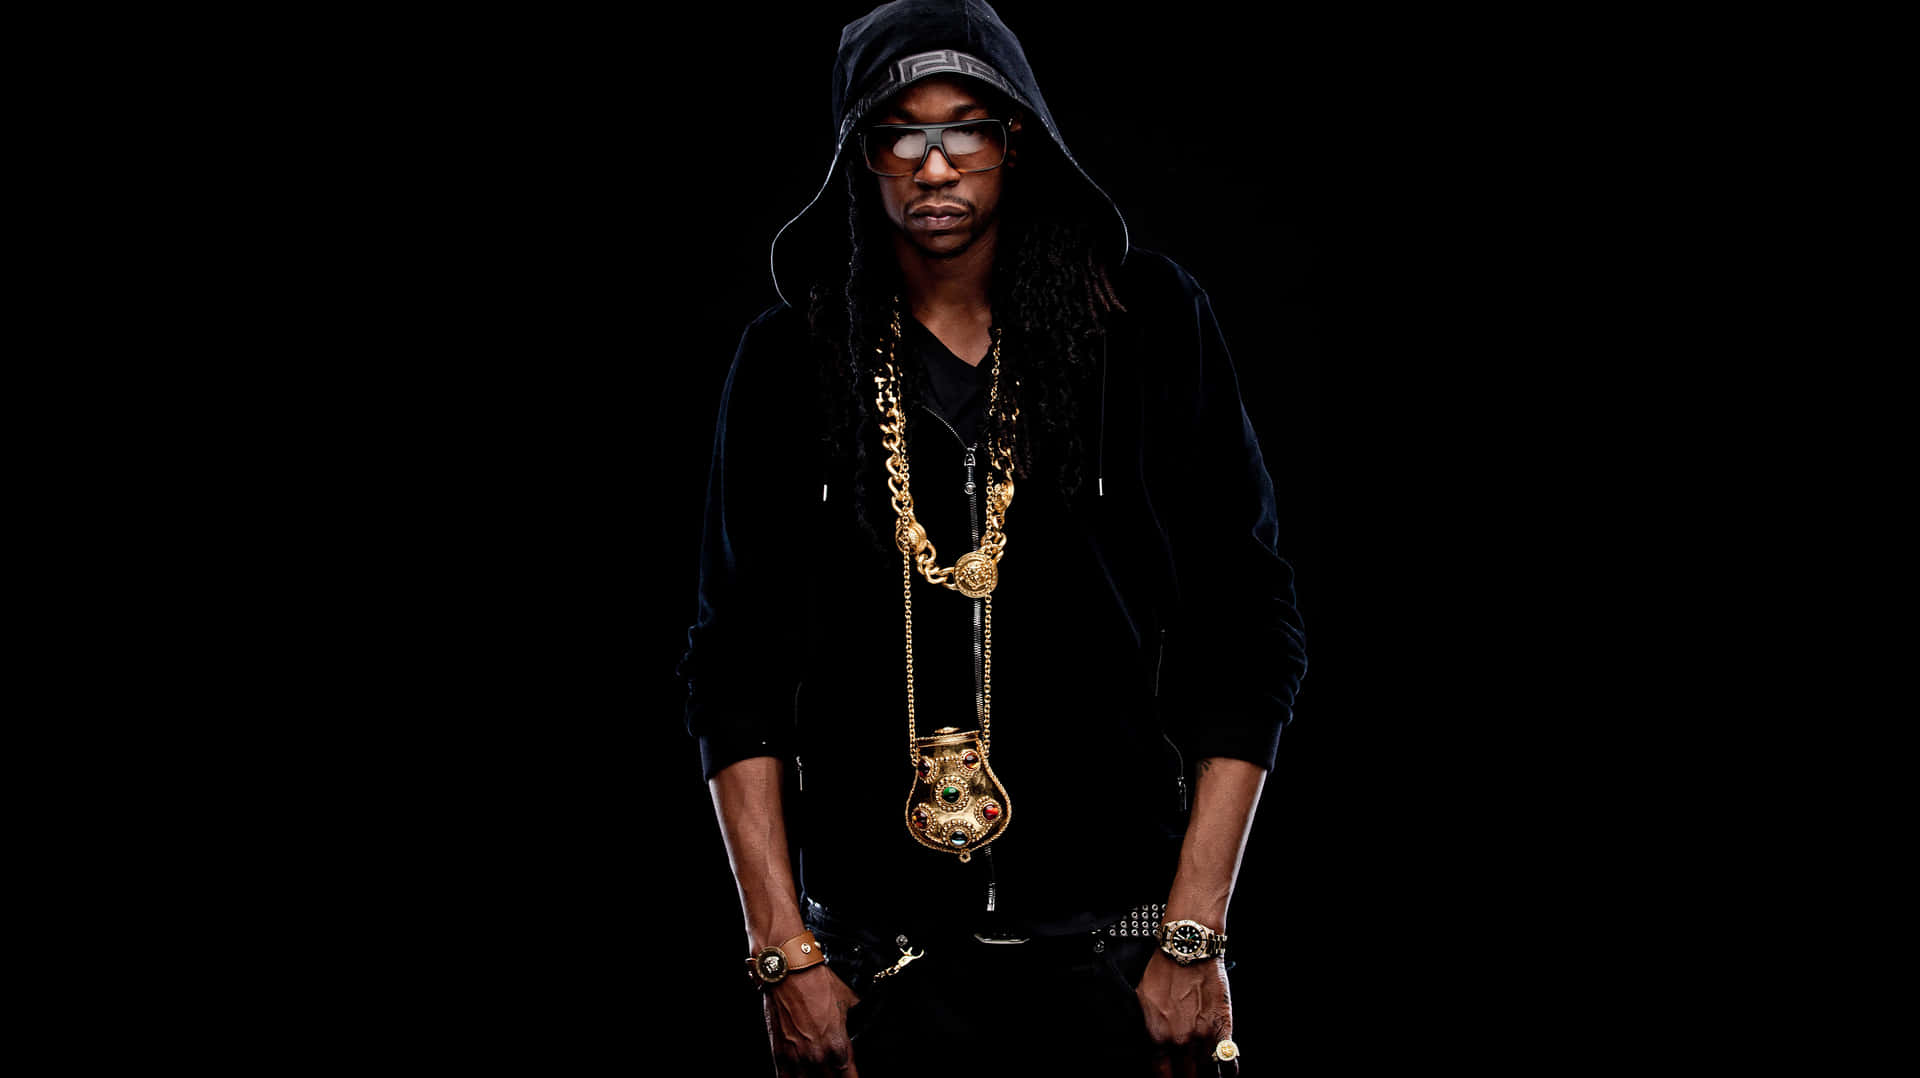 2 Chainz wearing his “Most Expensivest” chain